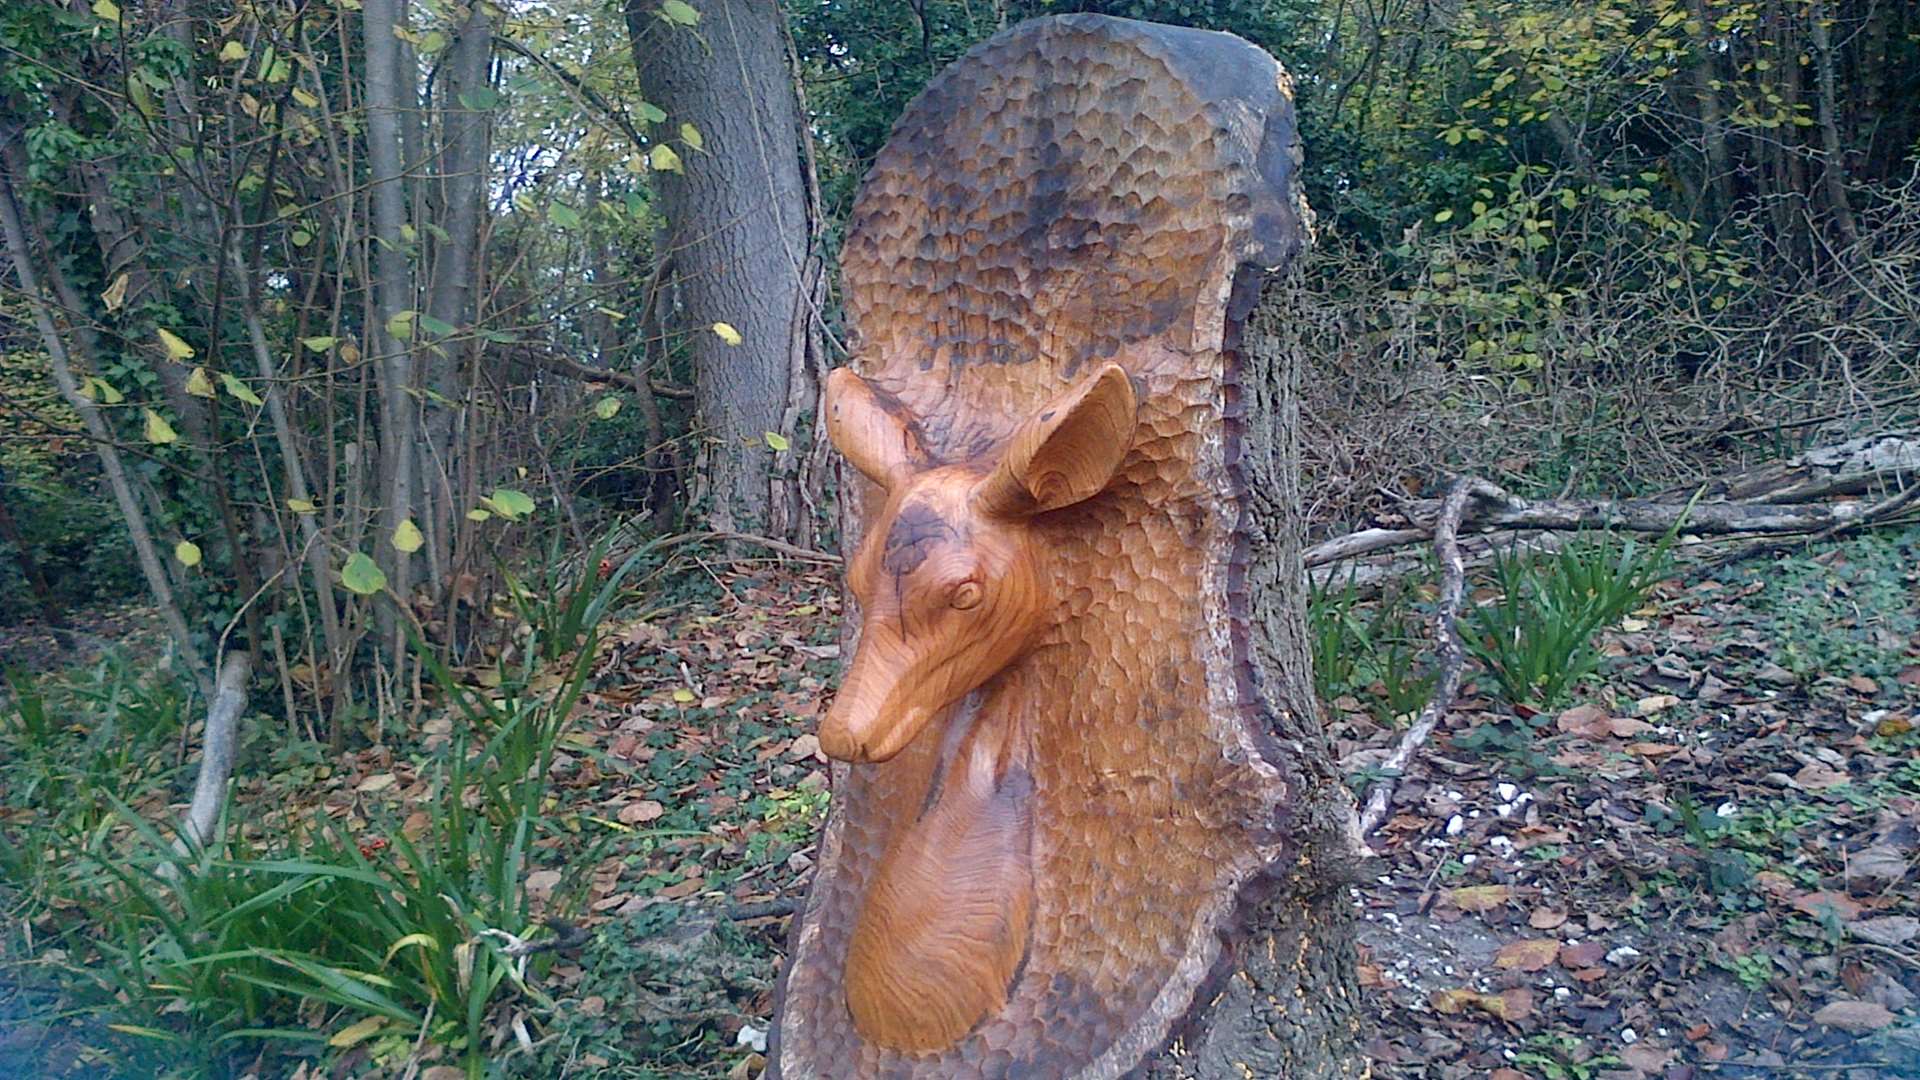 The deer sculpture was one of three installed at the nature reserve